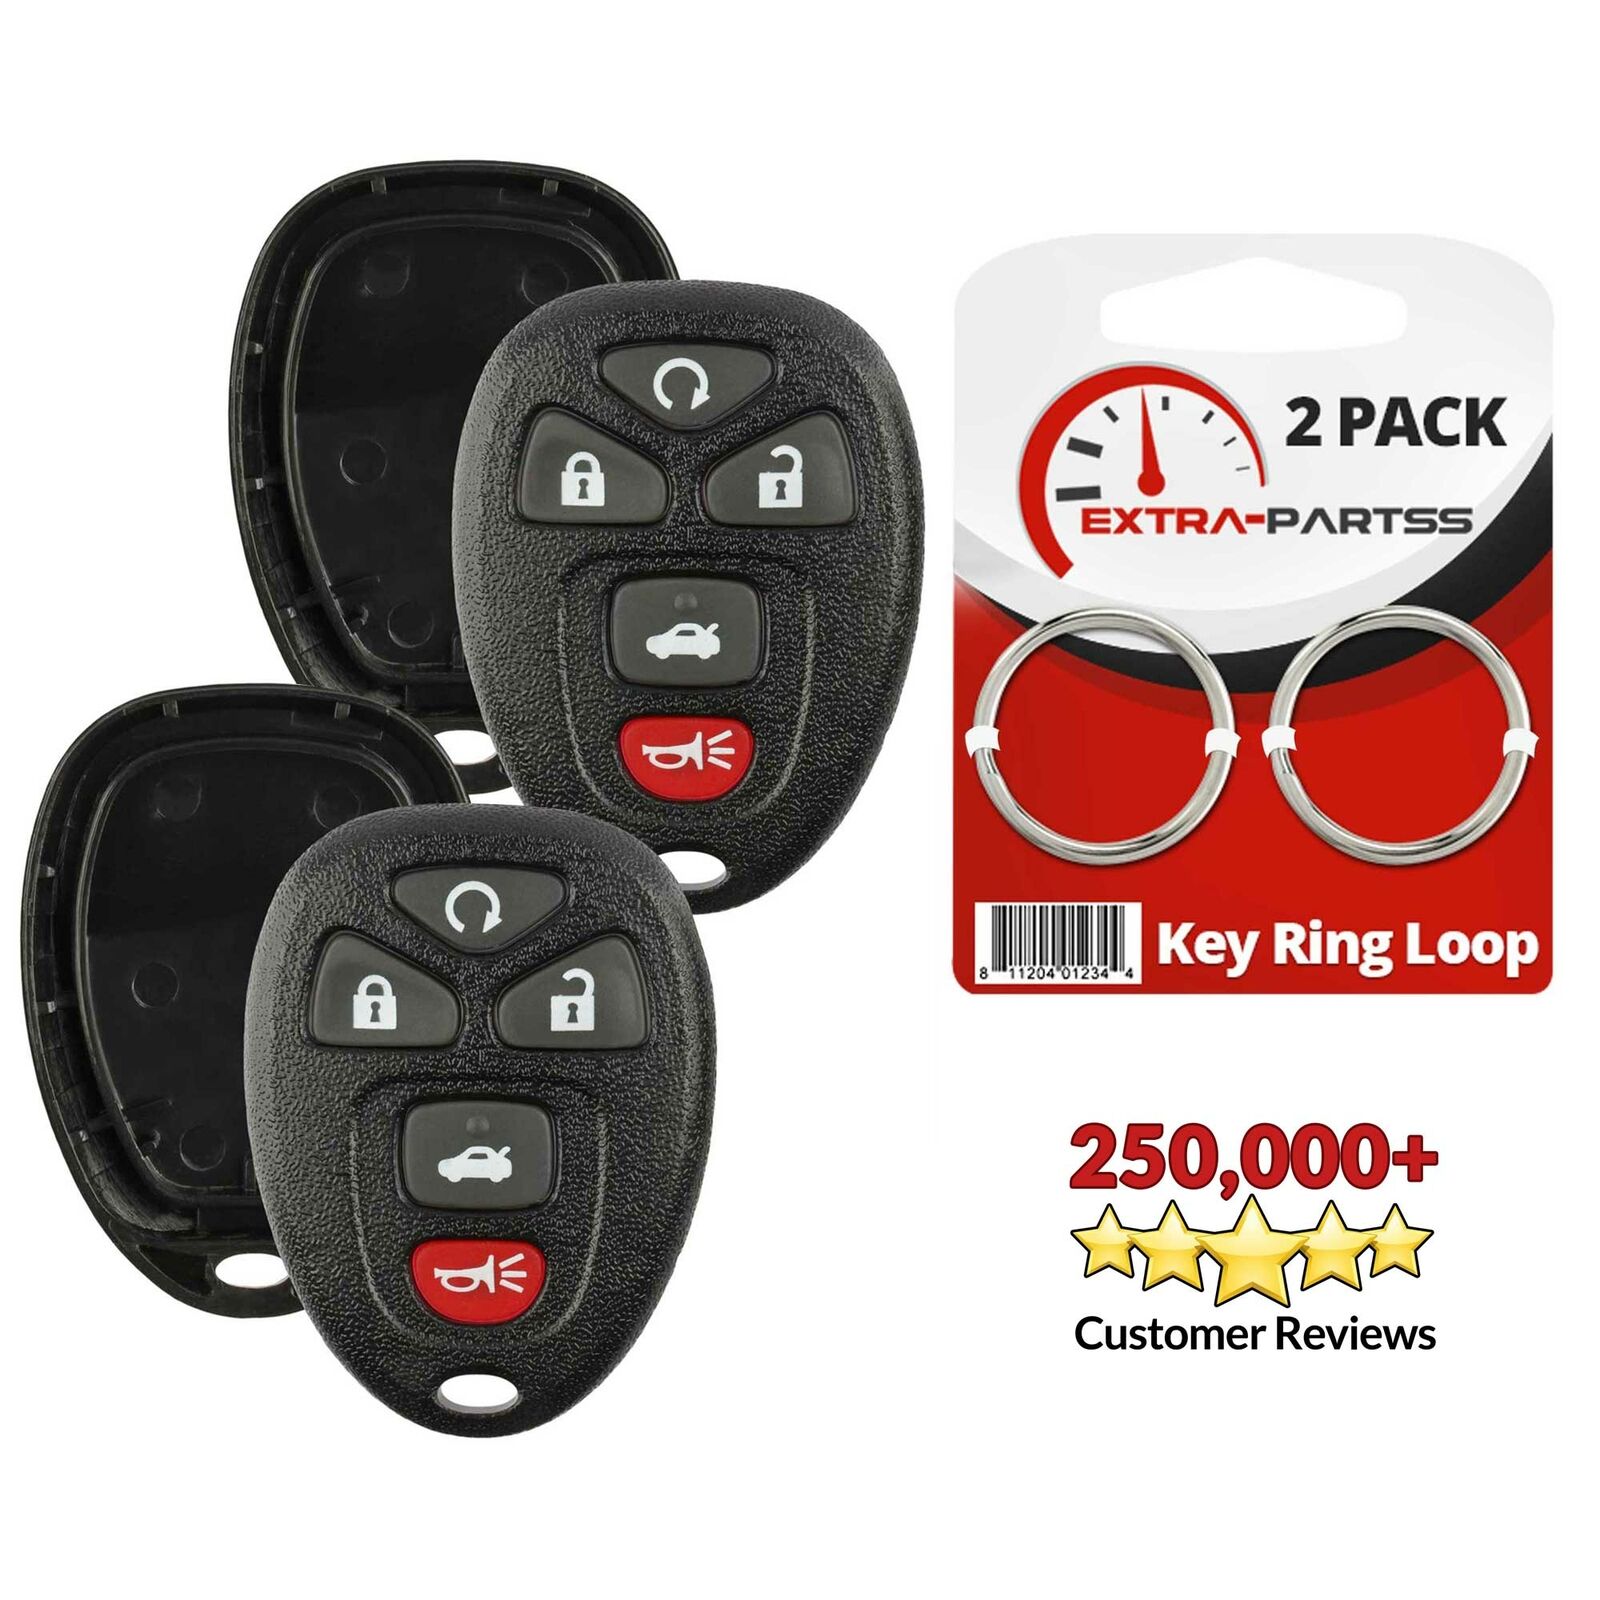 2 New Replacement Keyless Entry Remote Car Key Fob Shell Case & Pad for 22733524